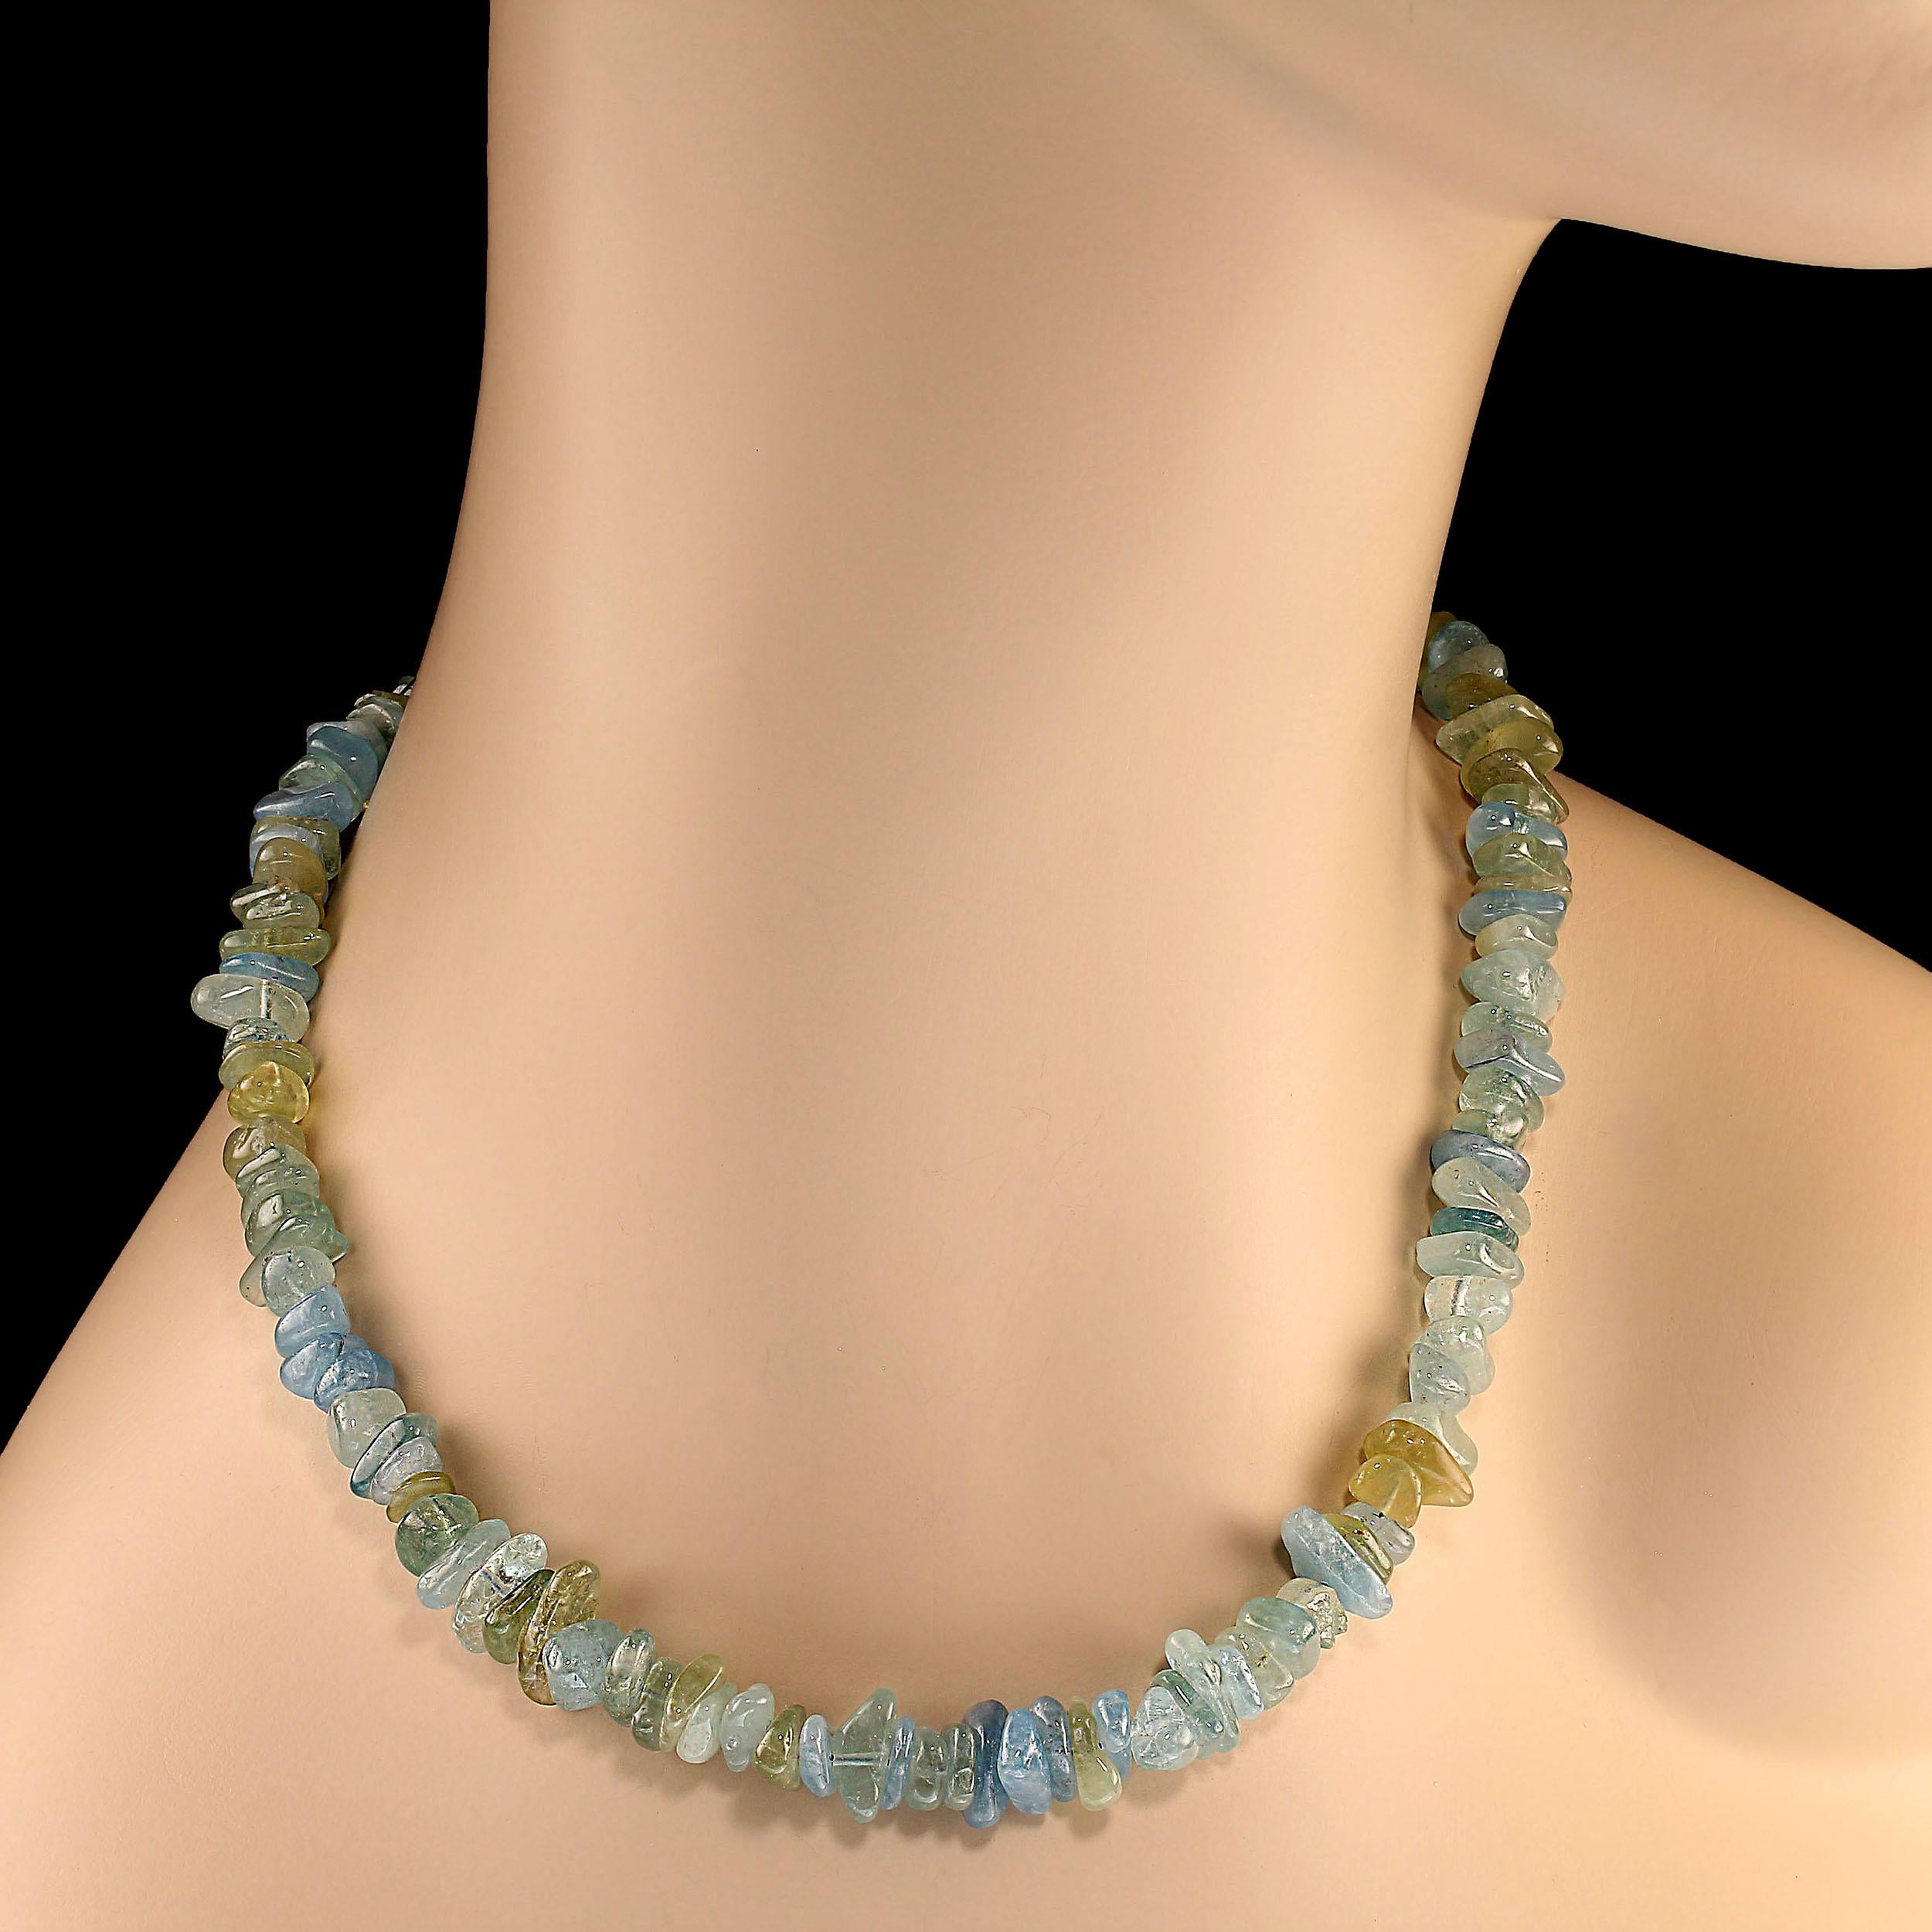 Bead AJD 18 Inch Highly Polished Blue/Green Aquamarine Chip Necklace March Birthstone